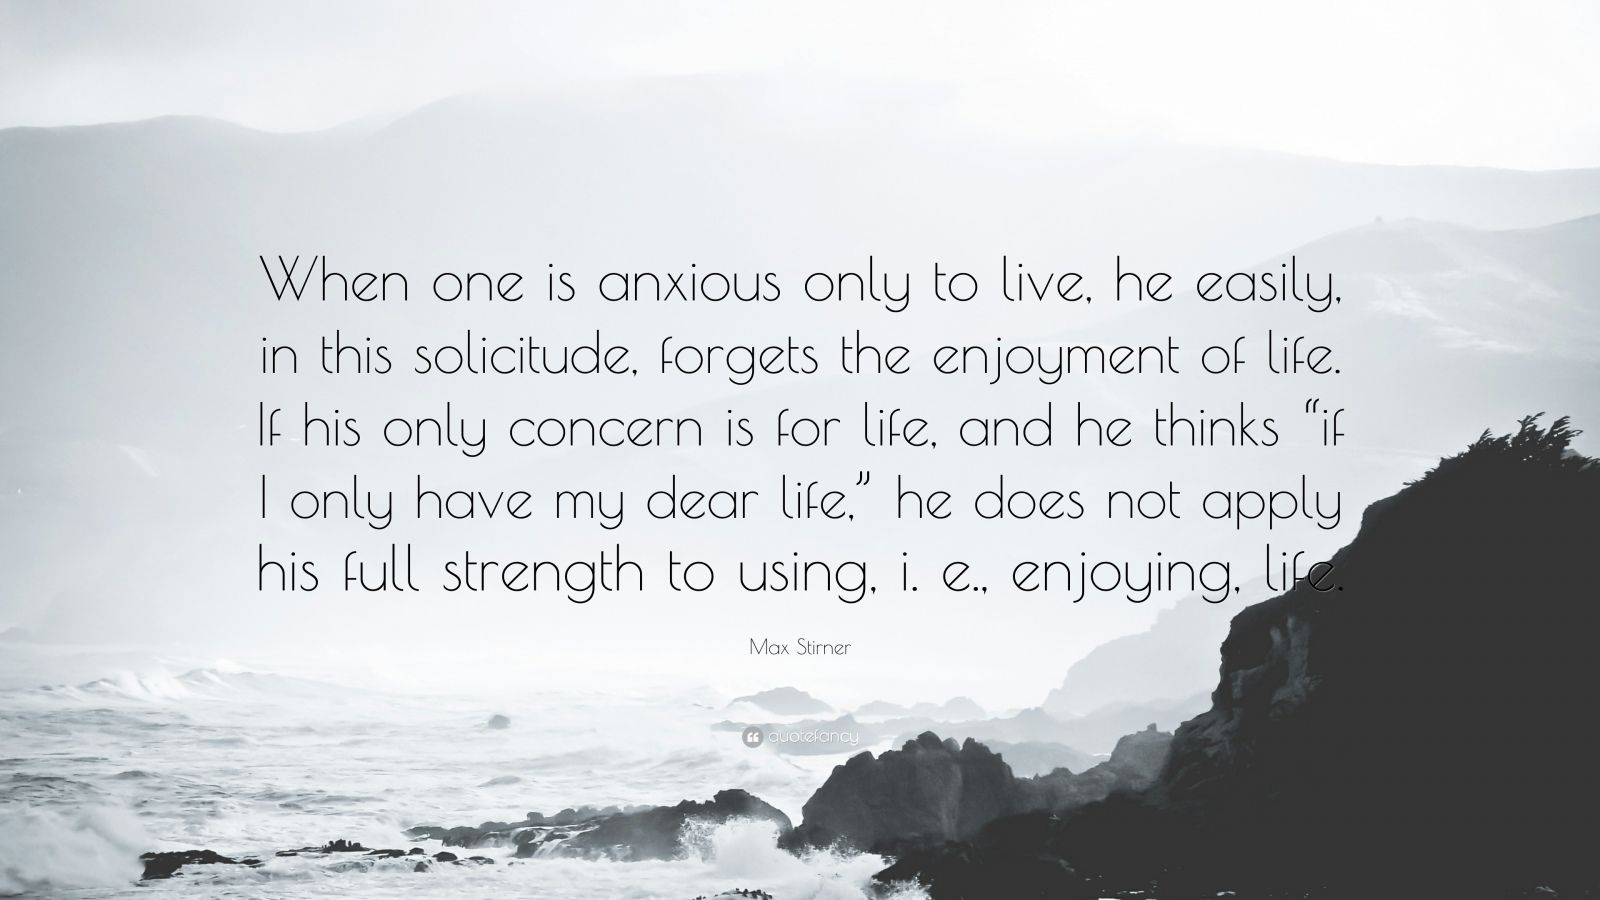 Max Stirner Quote “When one is anxious only to live he easily